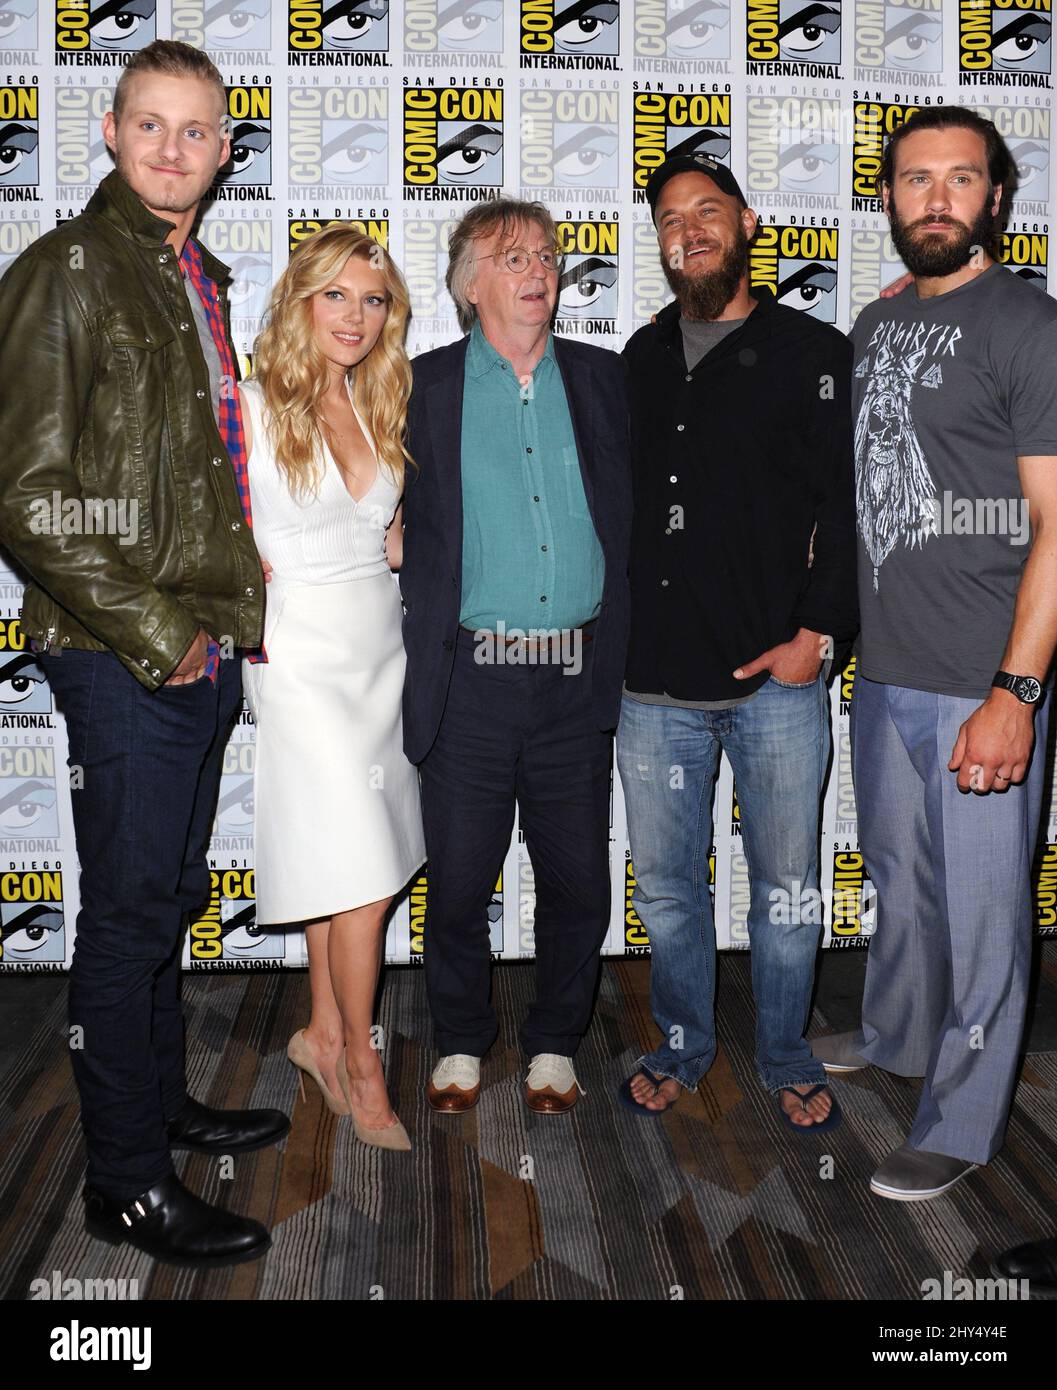 Alexander Ludwig, Katherine Winnick, Michael Hirst, Travis Fimme attending Comic-Con 2014 in San Diego, California. Stock Photo